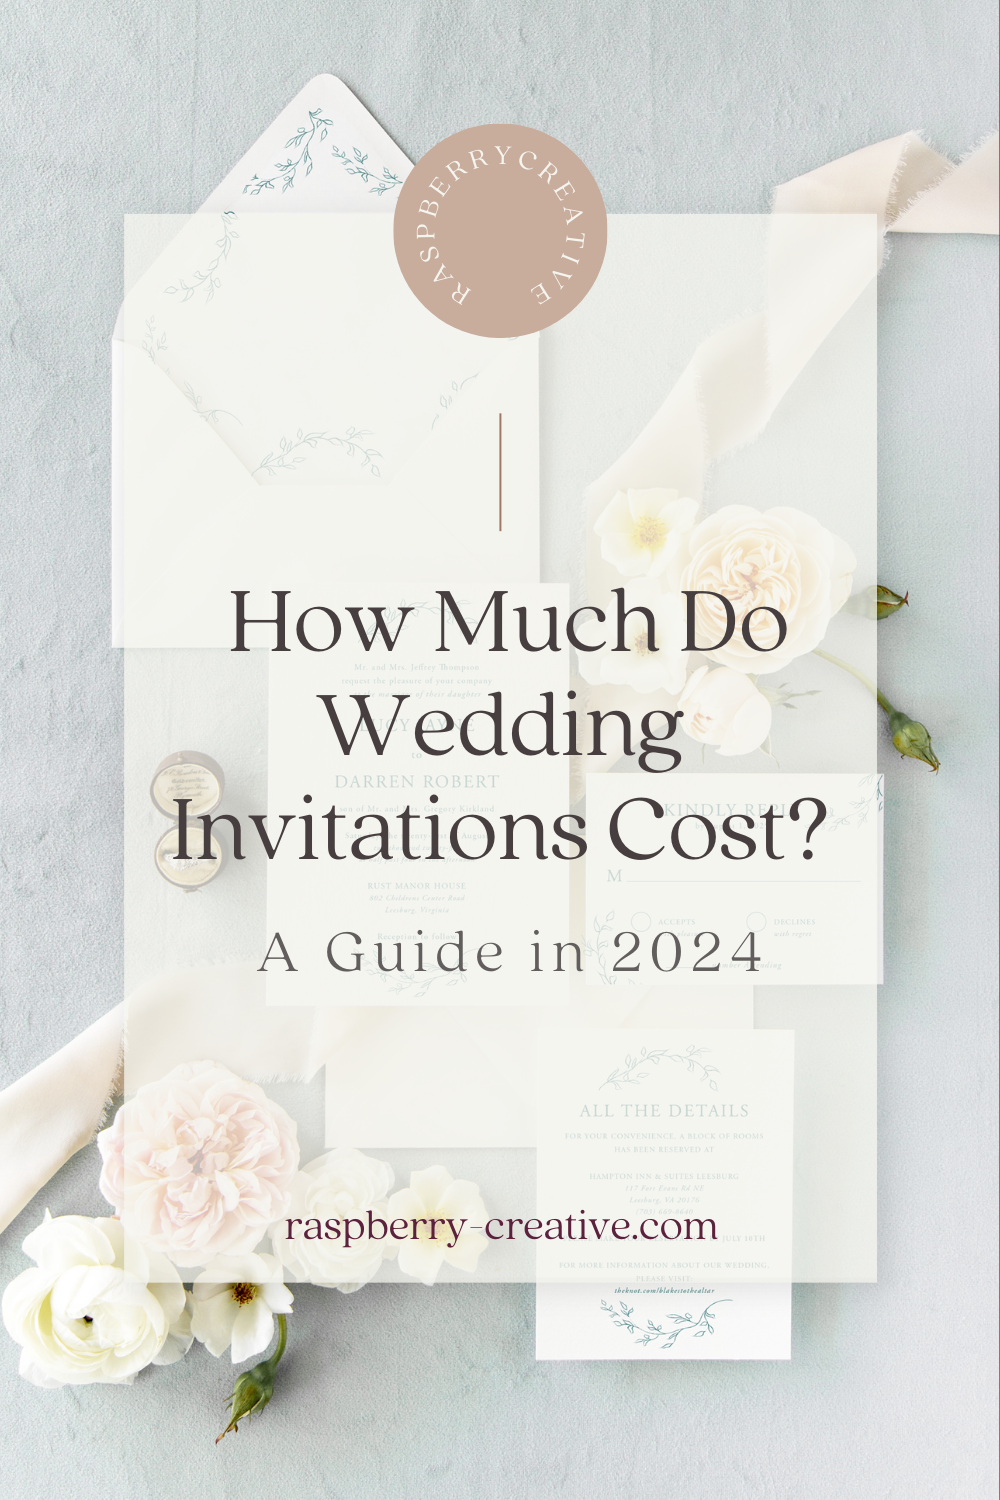 How Much Do Wedding Invitations Cost? A Guide in 2024